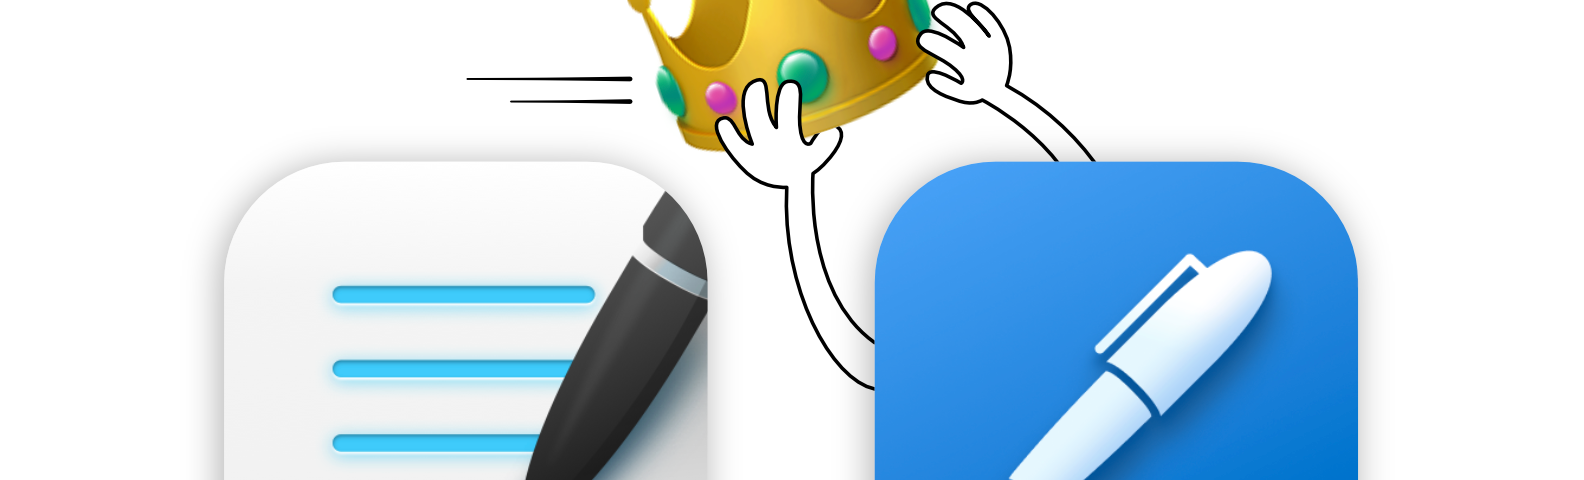 GoodNotes icon on the left, with Noteshelf icon on the right. Crown emoji has been removed from GoodNotes ‘head’ by Noteshelf’s cartoon arms.